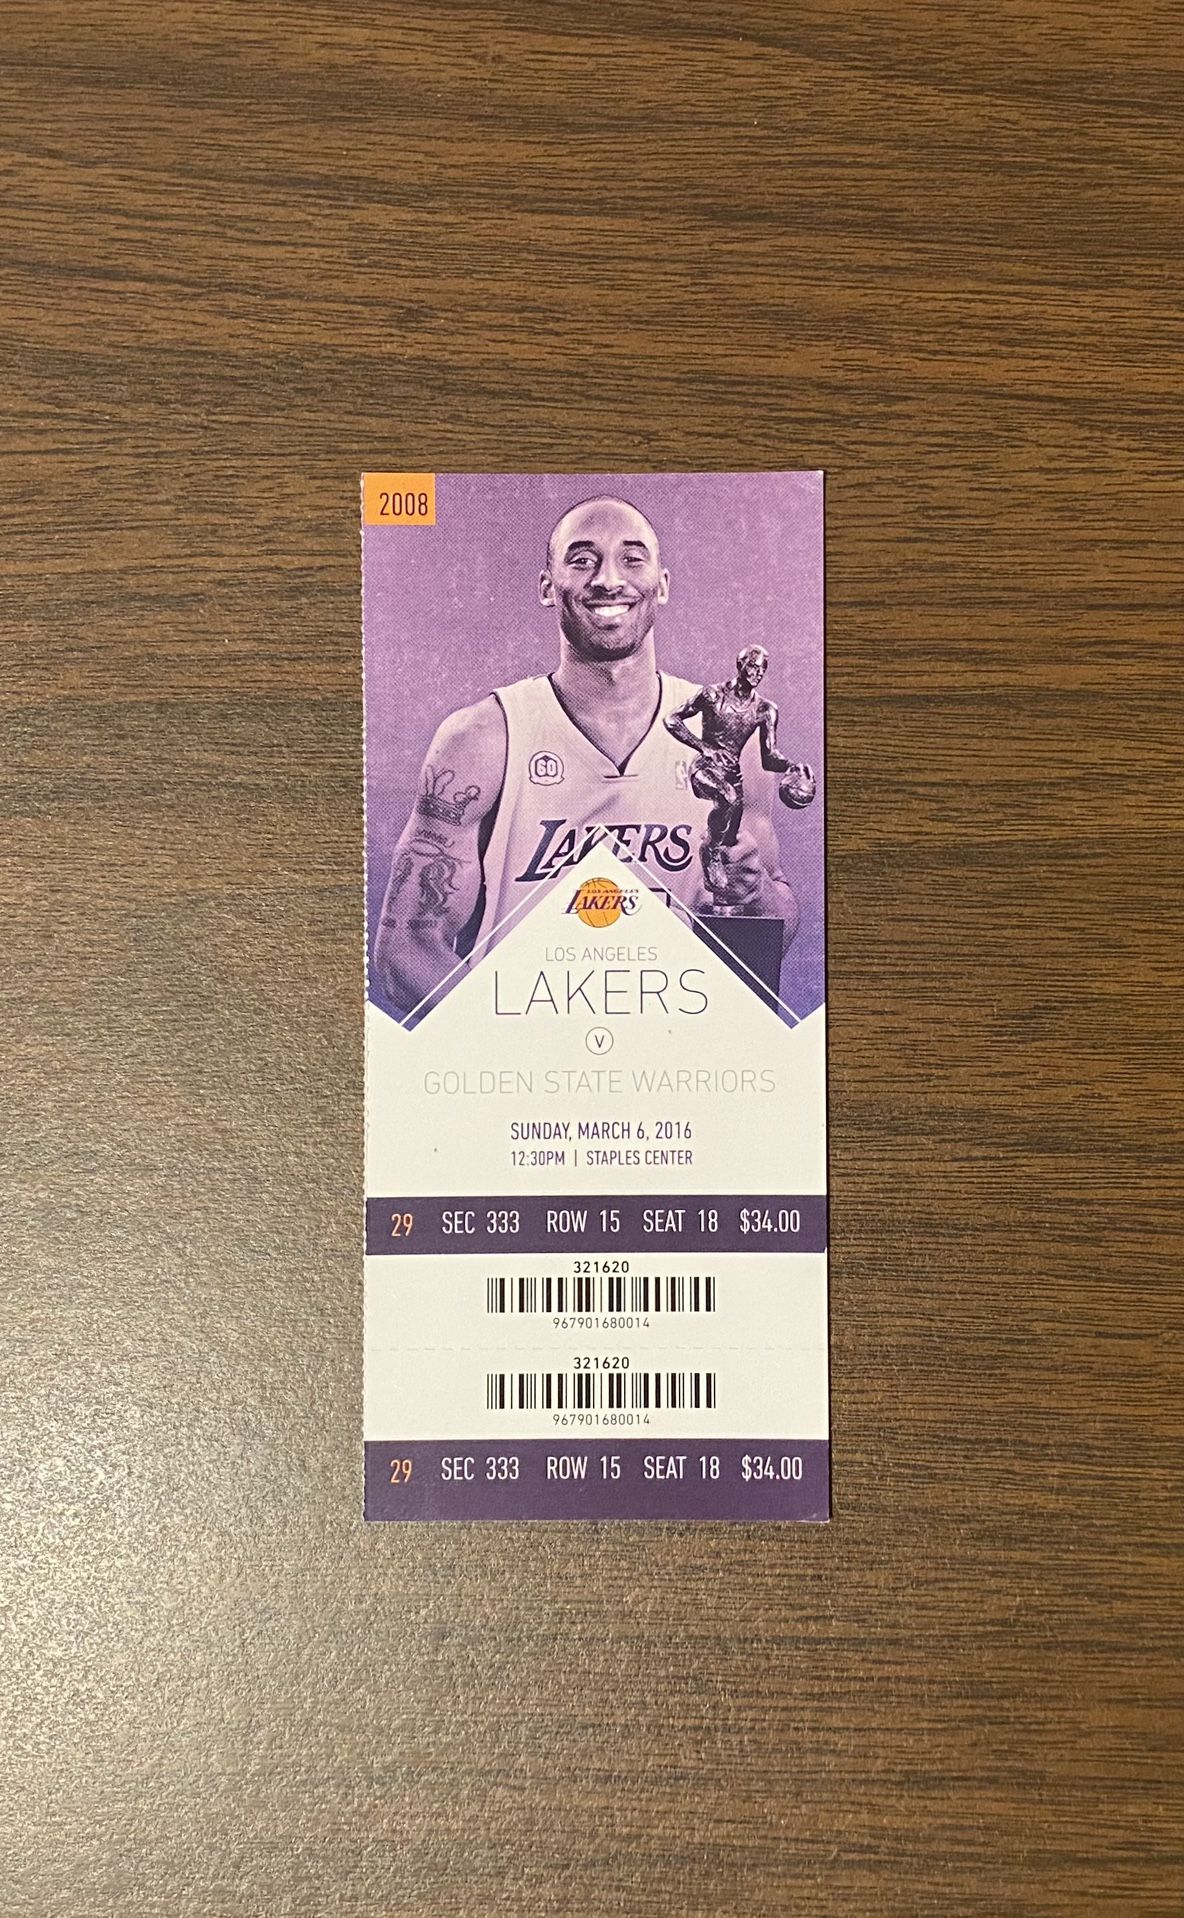 KOBE BRYANT vs STEPH CURRY AUTHENTIC LAST FINAL FULL GAME TICKET 03/06/2016 LOS ANGELES LAKERS vs GOLDEN STATE WARRIORS “BLACK MAMBA” 